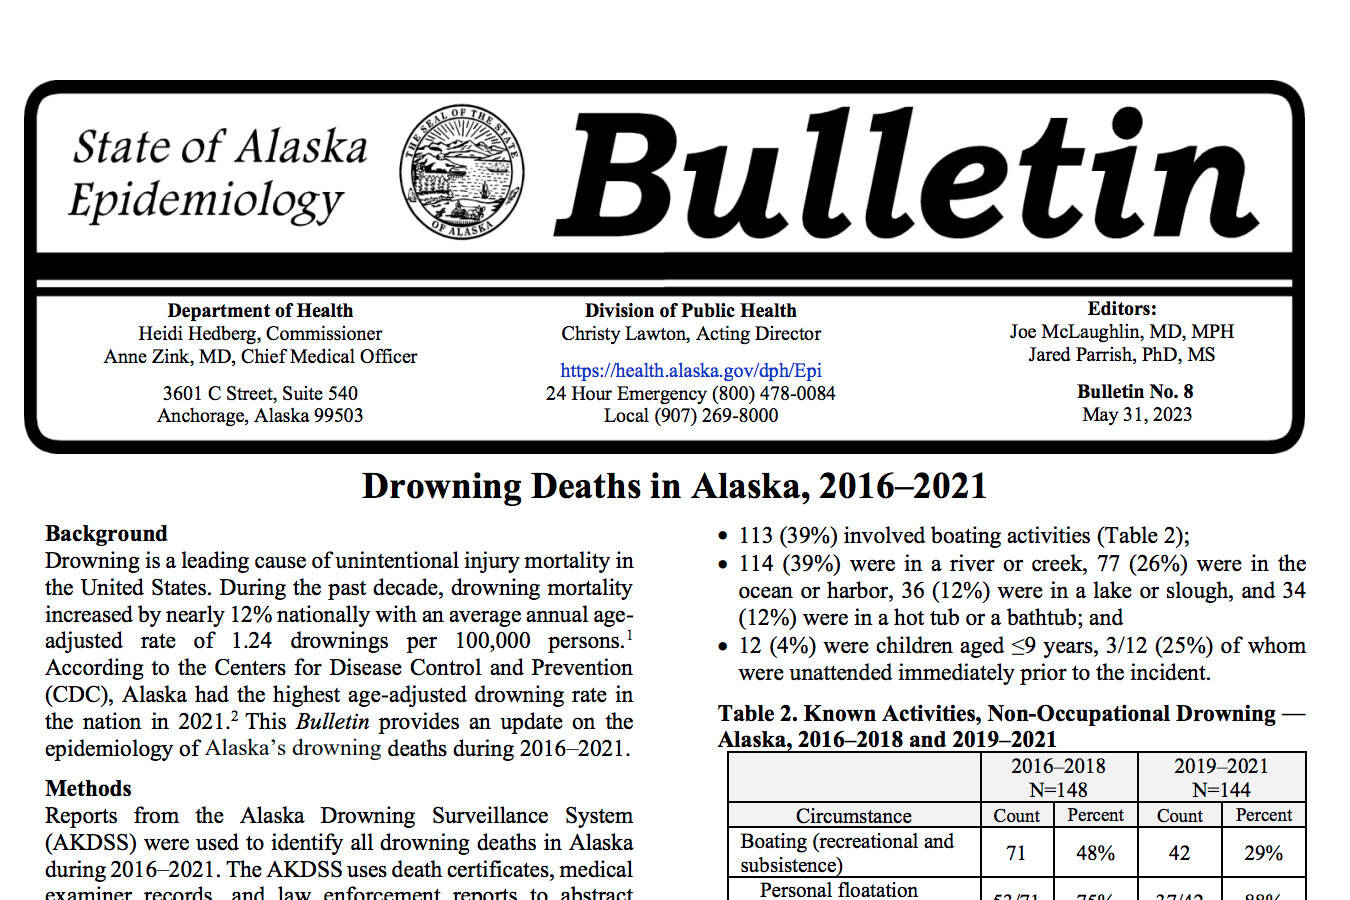 An Epidemiology Bulletin titled “Drowning Deaths in Alaska, 2016-2021” published Wednesday, May 31, 2023. (Screenshot)